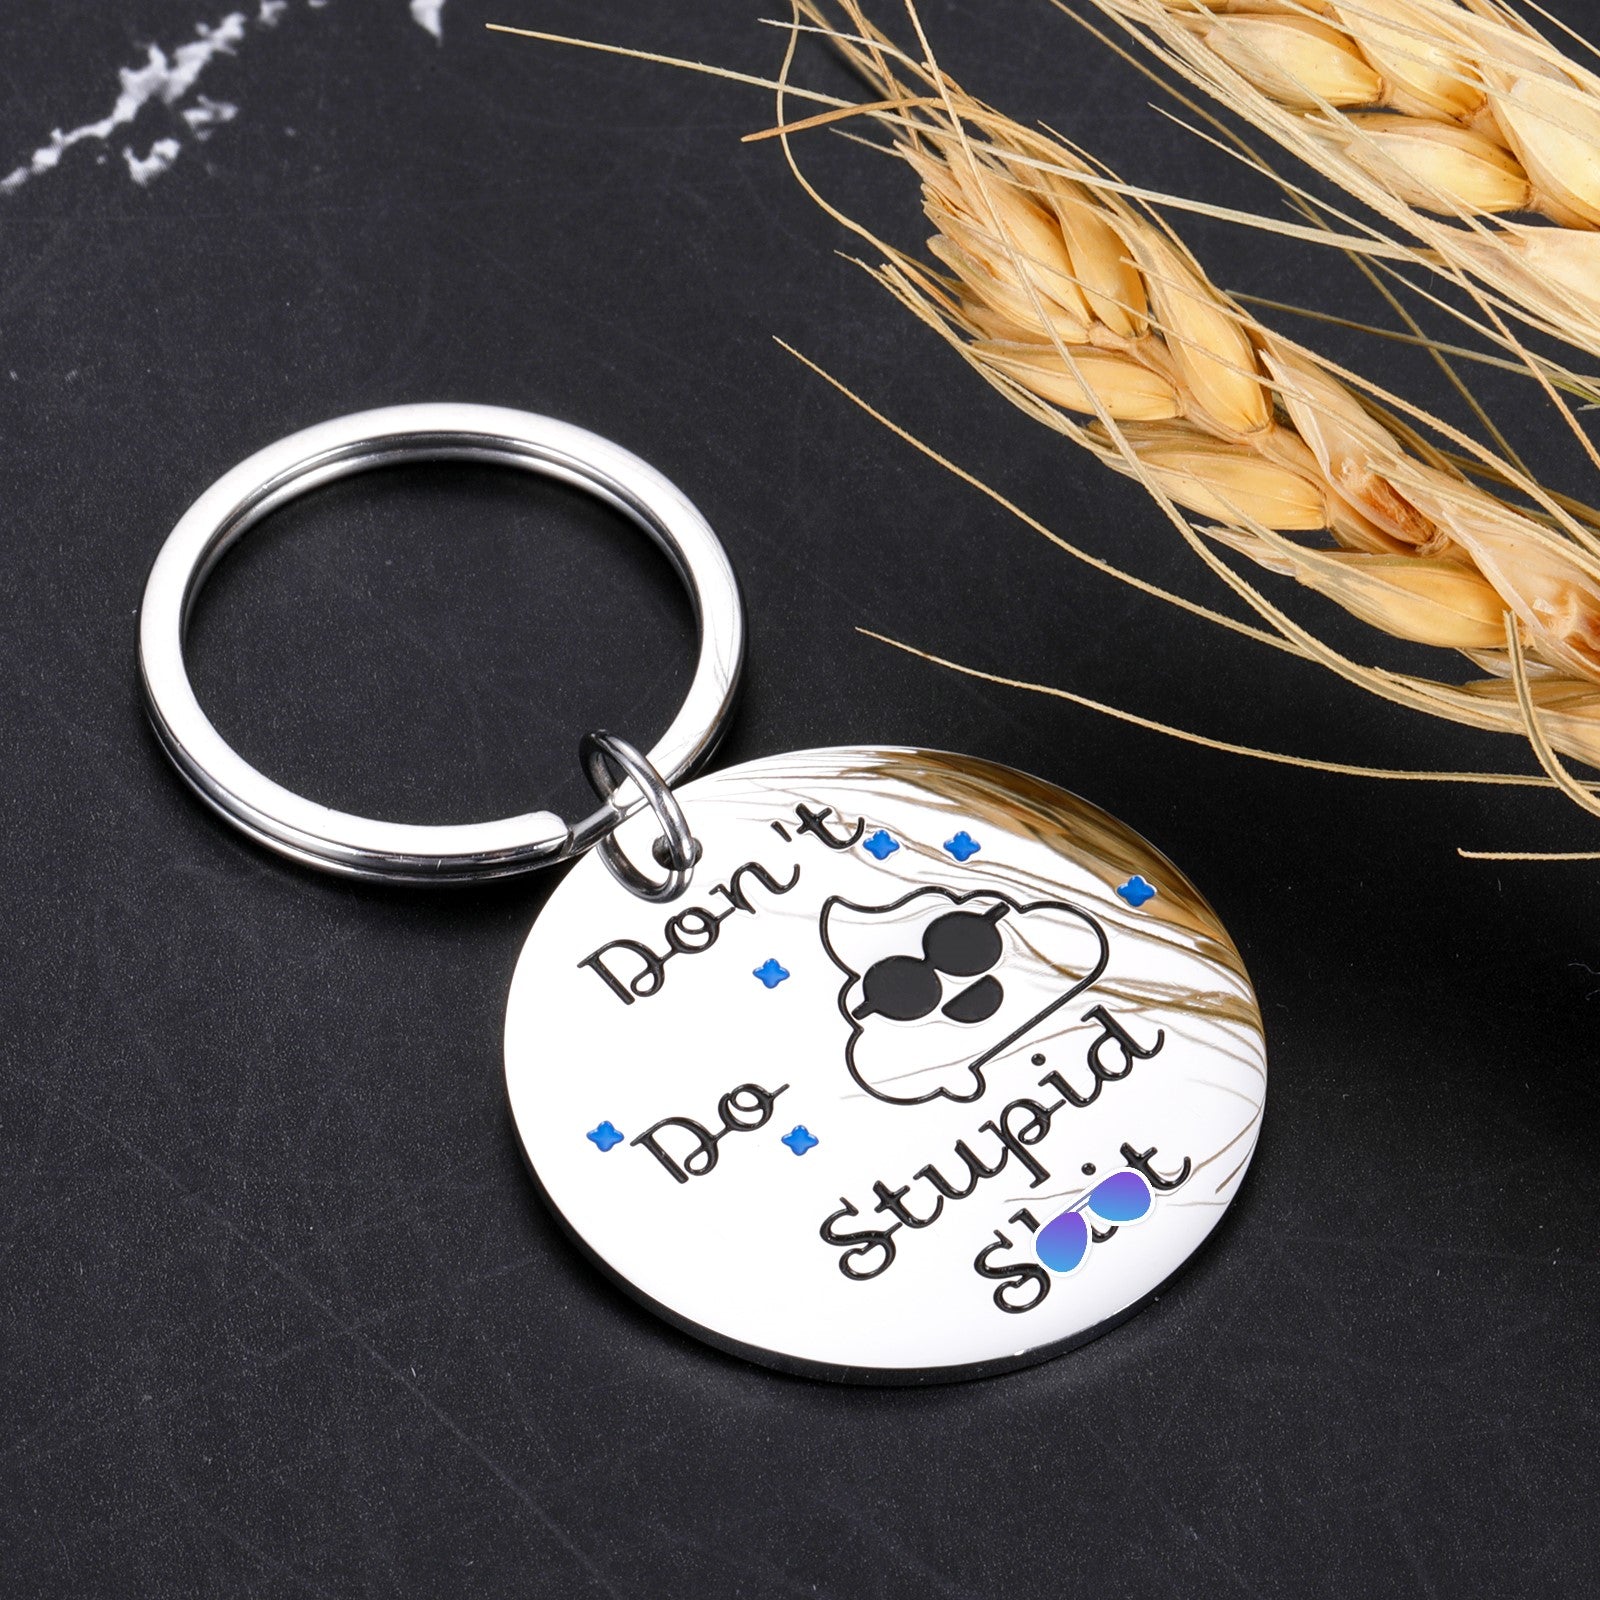 Father To Kids Don't Do Stupid Keychain For Teenage Son Graduation  Valentine Gag Gifts From Dad